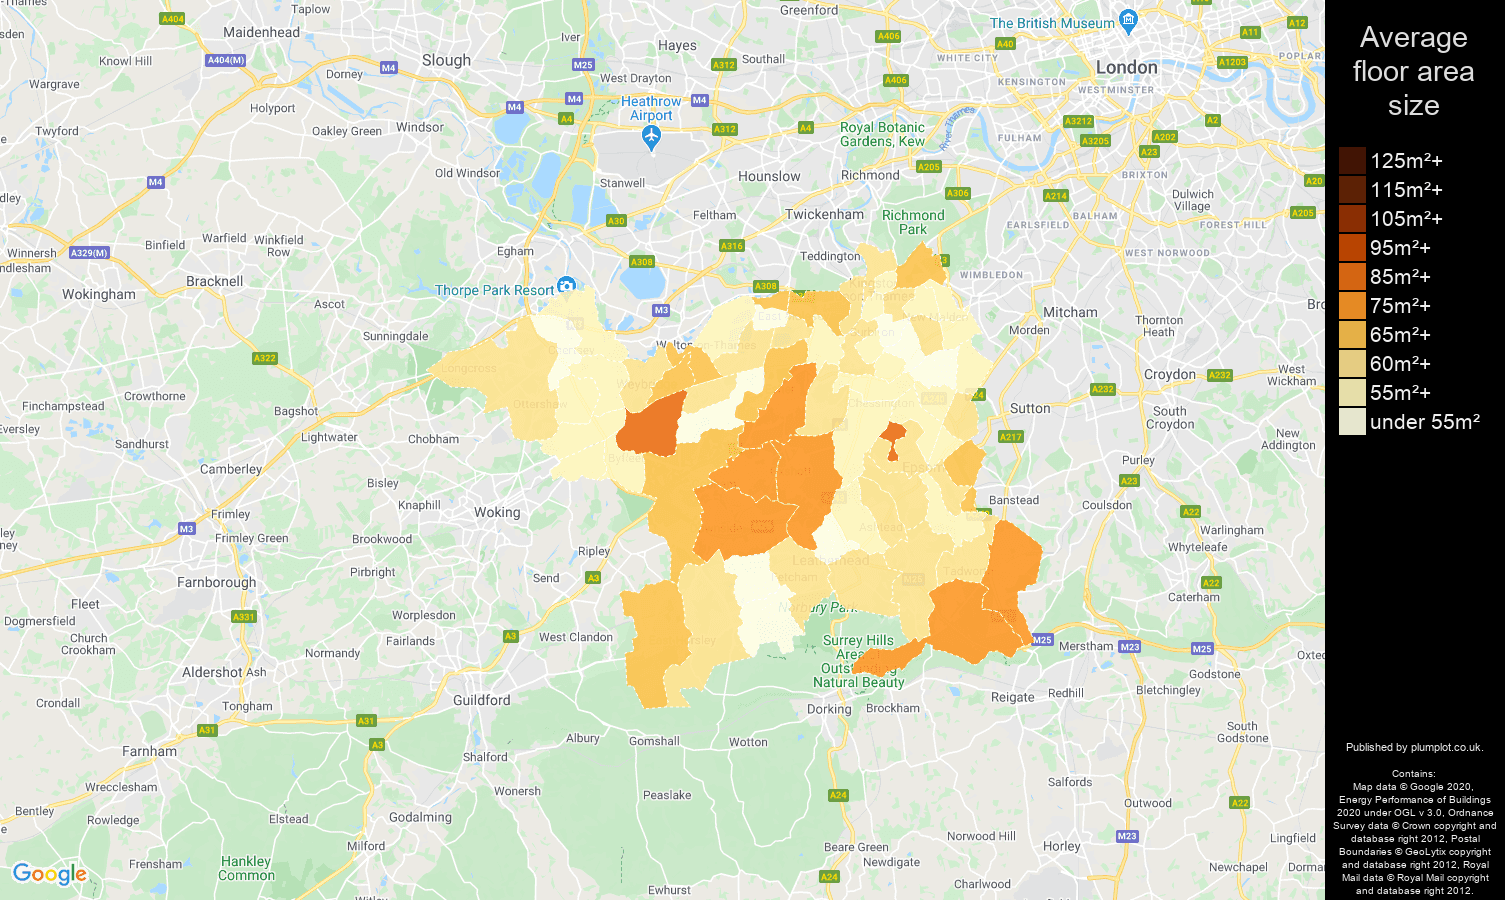 Kingston upon Thames map of average floor area size of flats